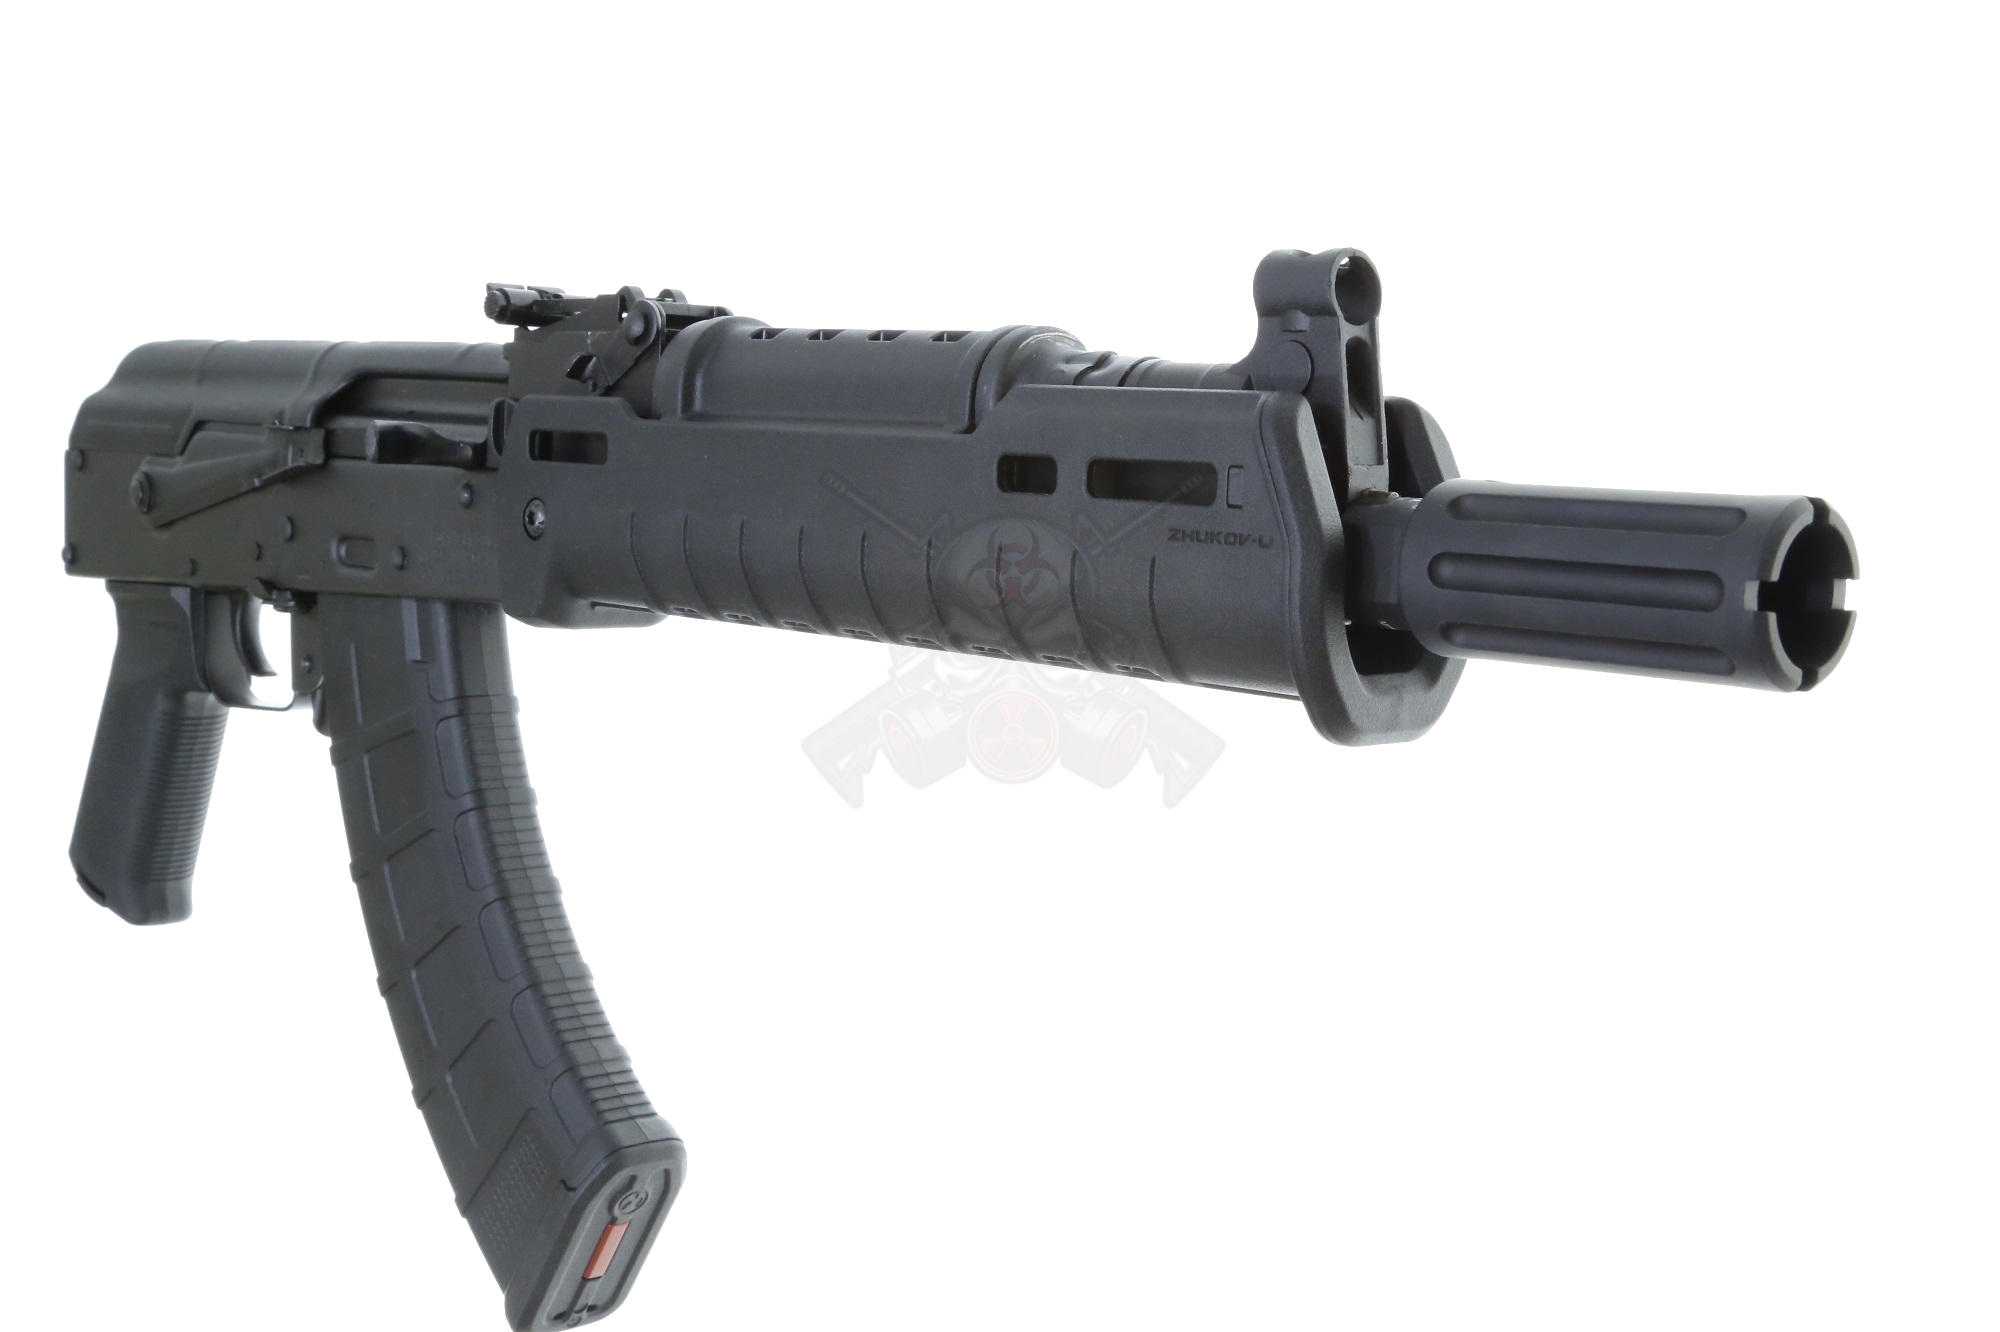 Gallery of Romanian Ak With Magpul Zhukov Stock.